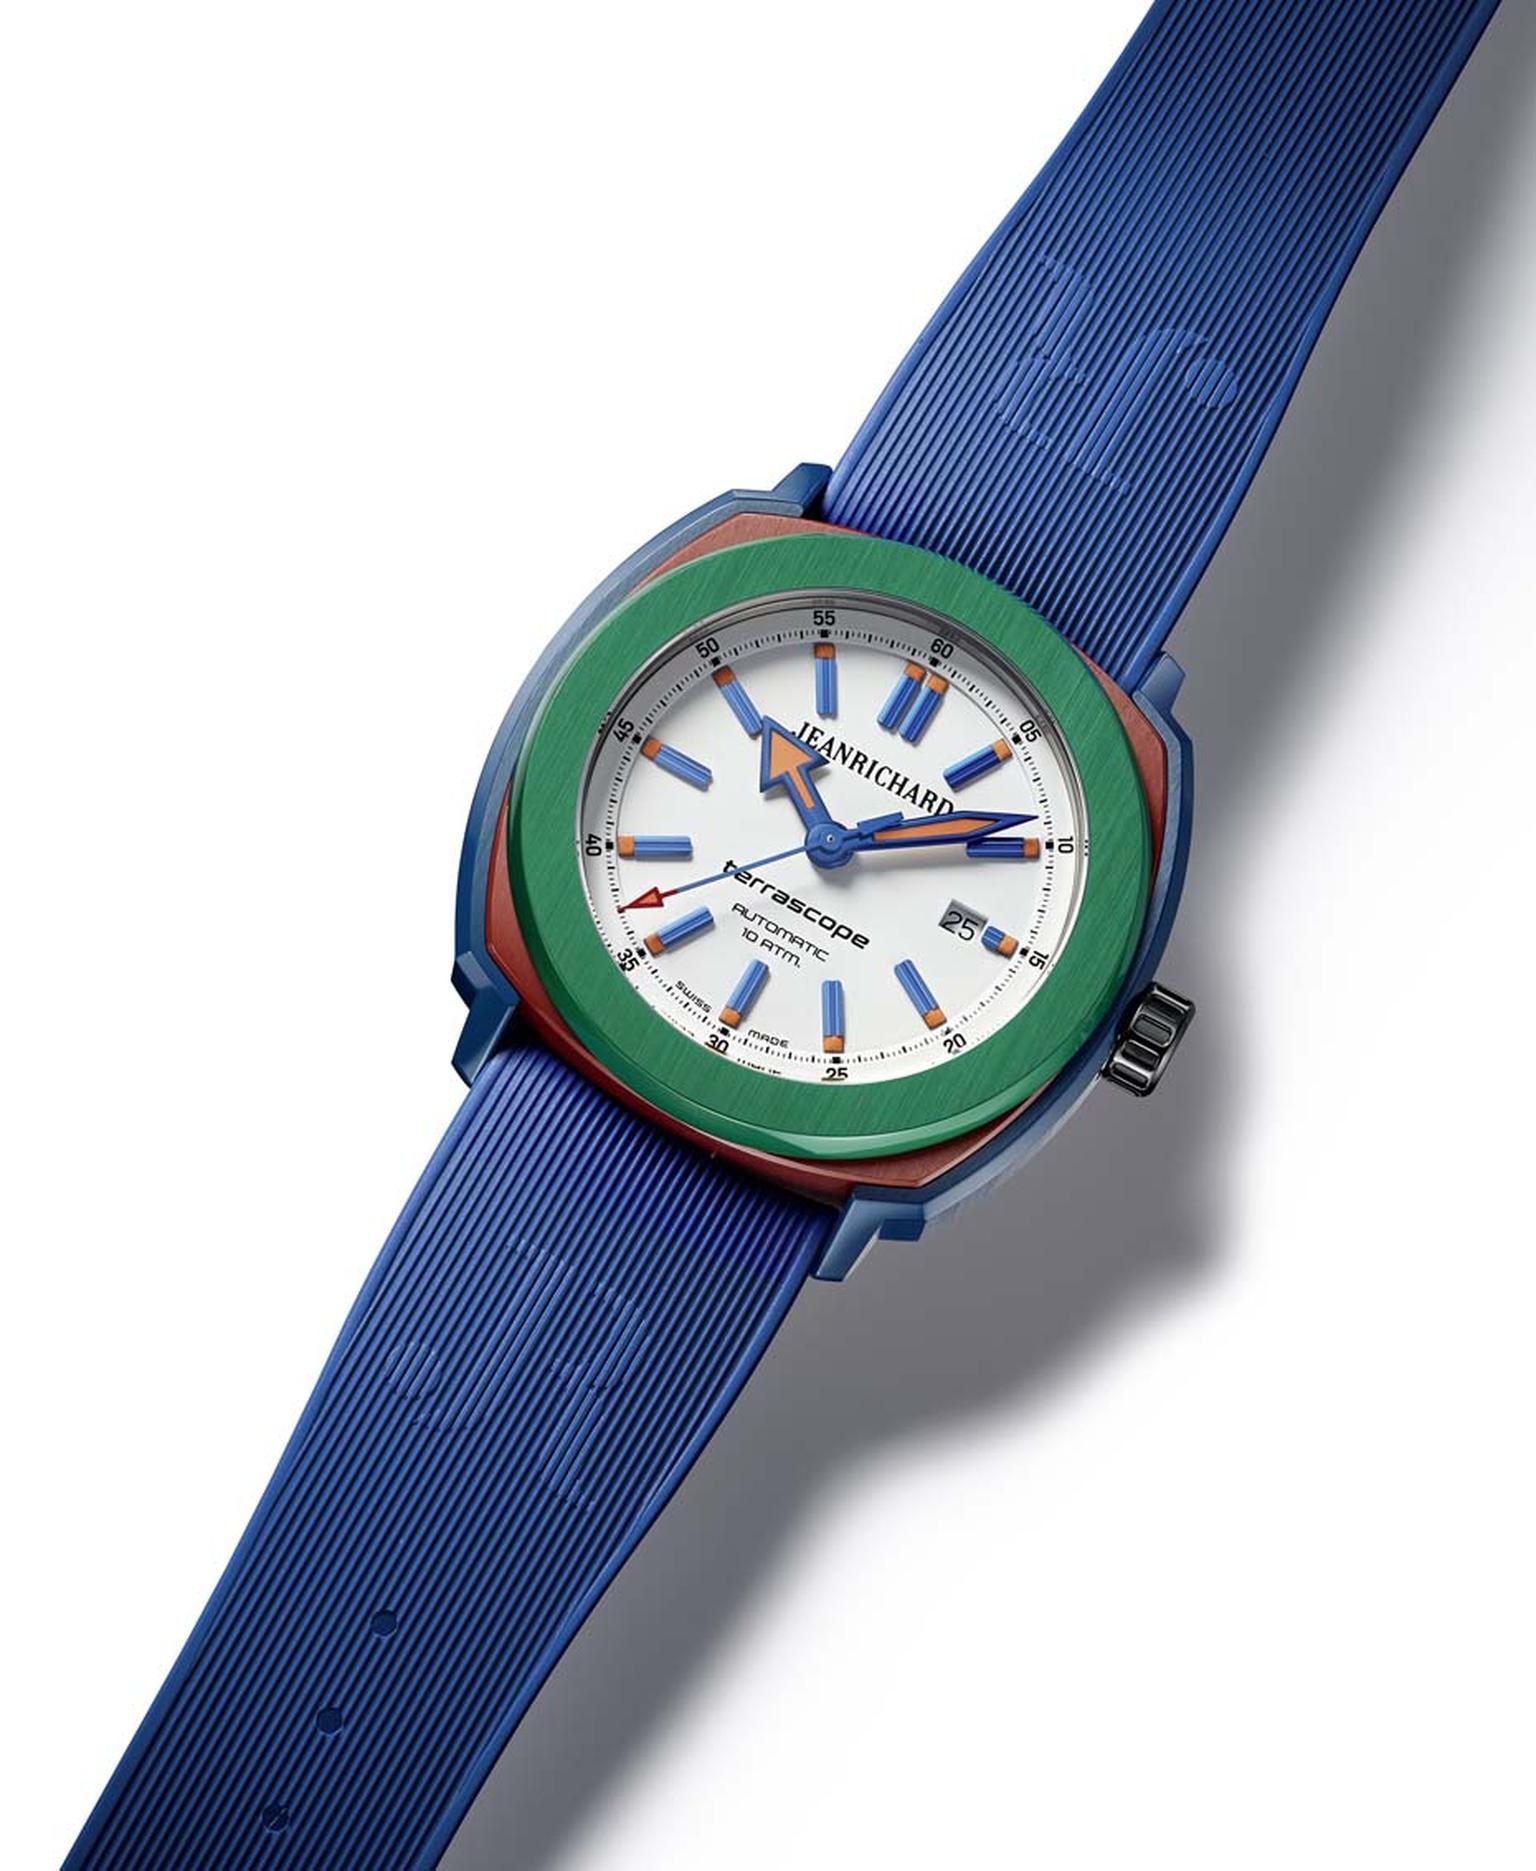 JeanRichard Terrascope watch with a green bezel and blue strap is a colourful take on the collection which remains true to the originals design's tonneau case, large round bezel, alternating polished and satin-brushed finishings, and various coatings.